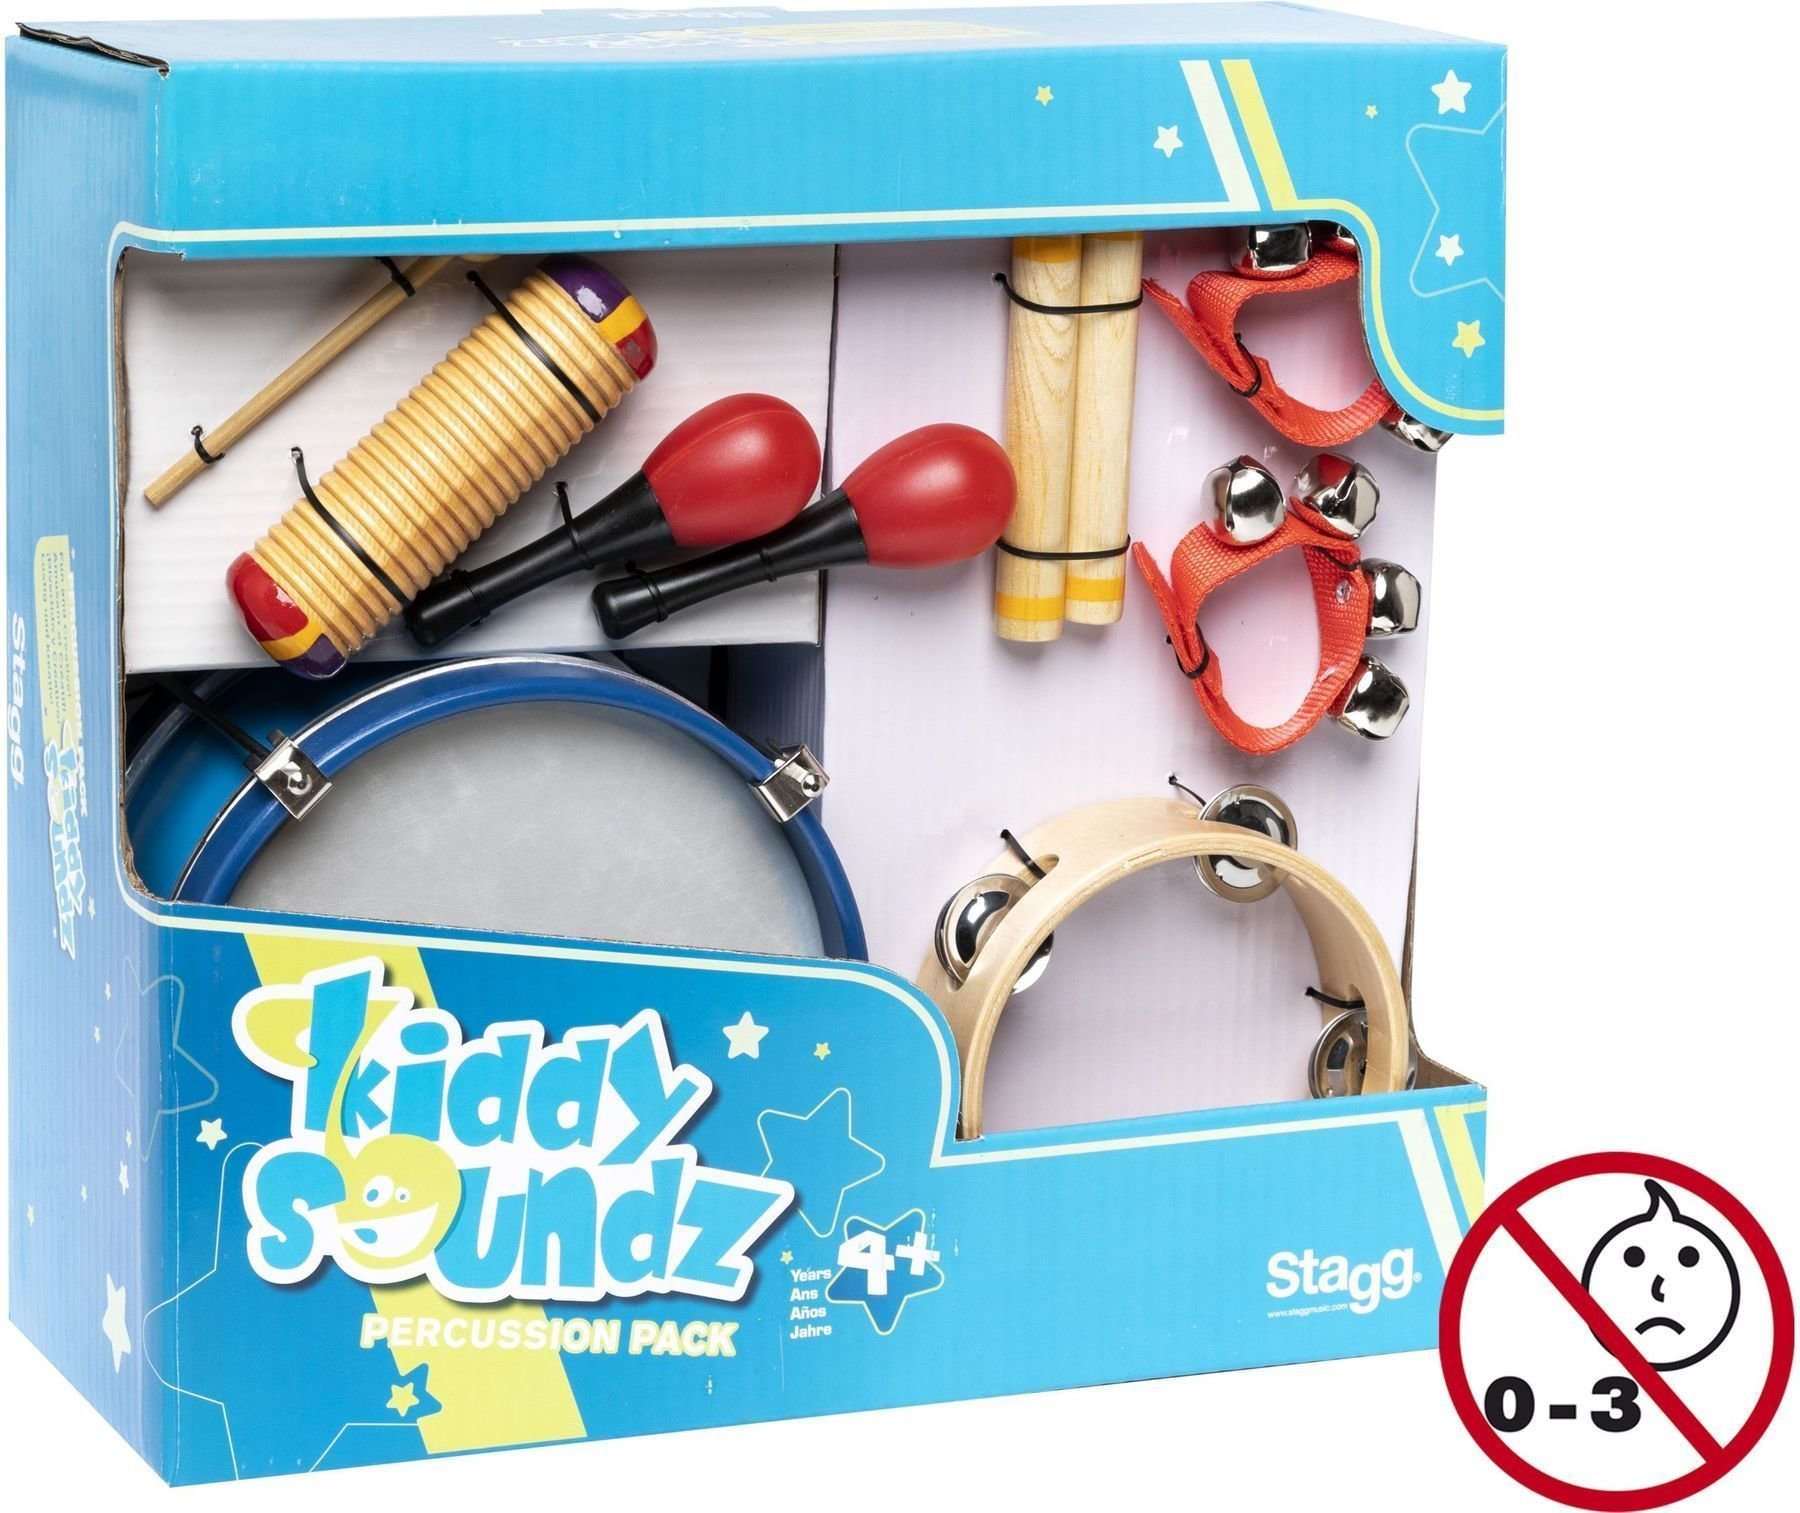 Percussion enfant Stagg CPK-04